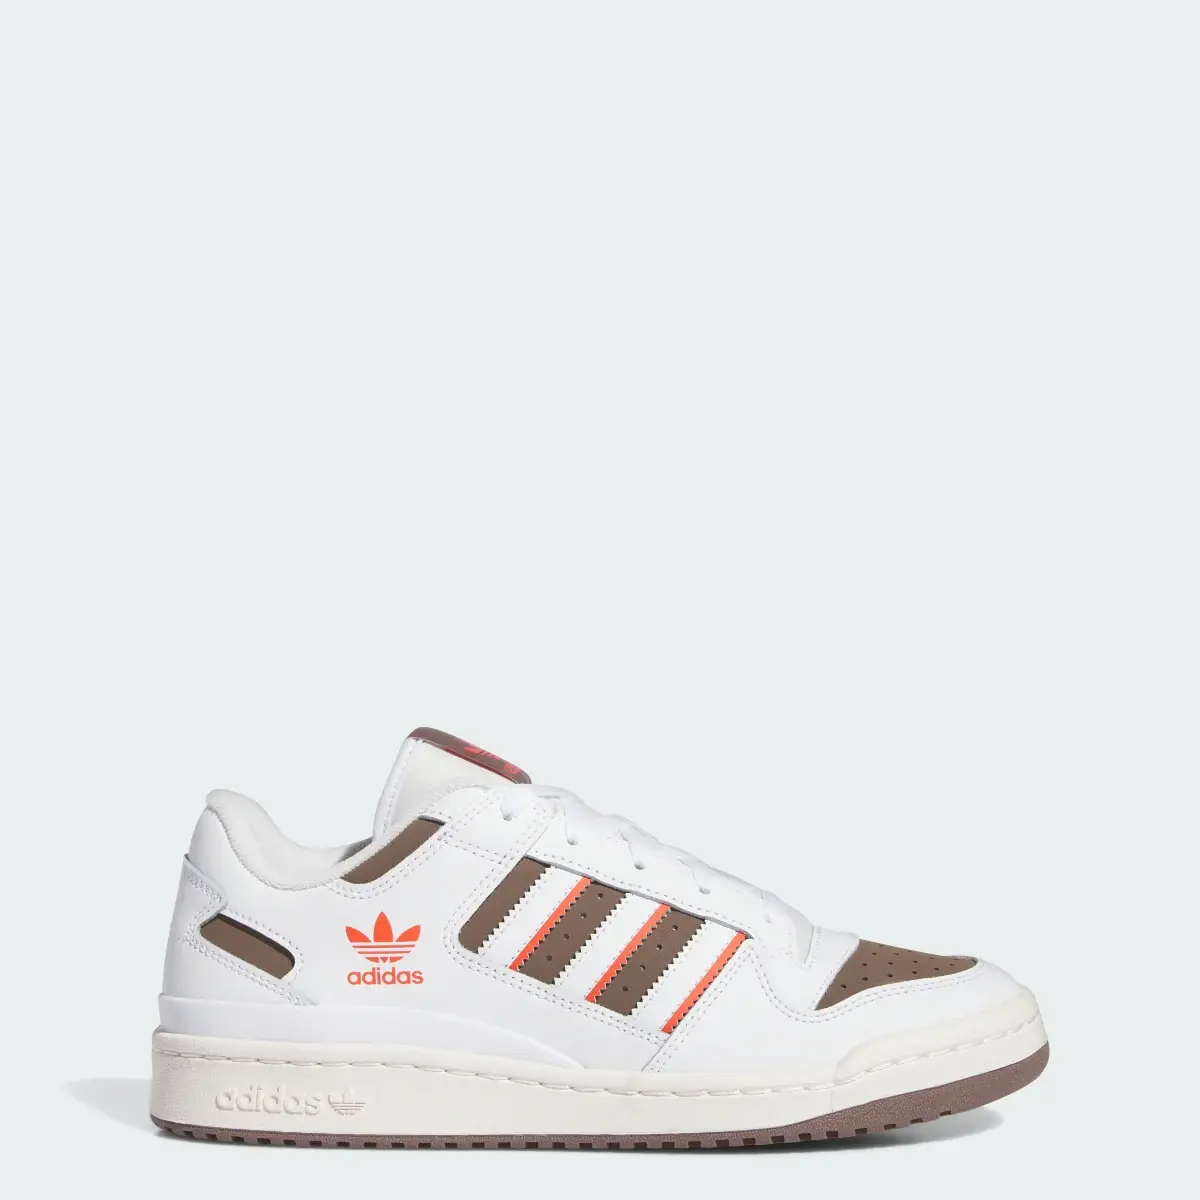 Adidas Forum Low CL Basketball Shoes. 1